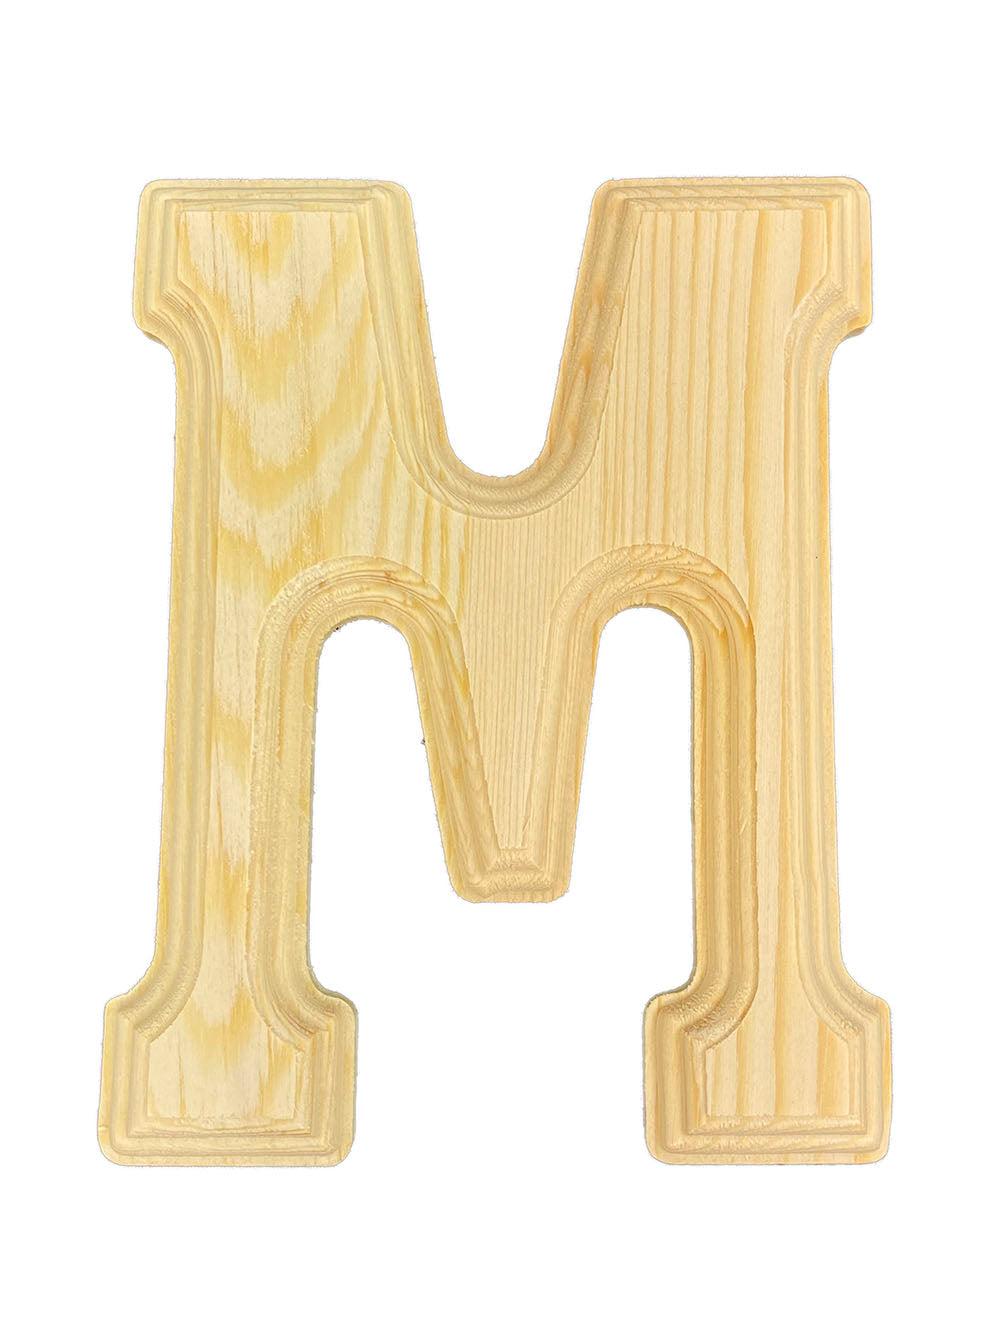 CUXFLS 6 inch 3D Wooden Letters, Natural Wood Alphabet Capital Letters- Unfinished Wood Alphabet for Letter Board - Wall Decor - DIY - Painted 